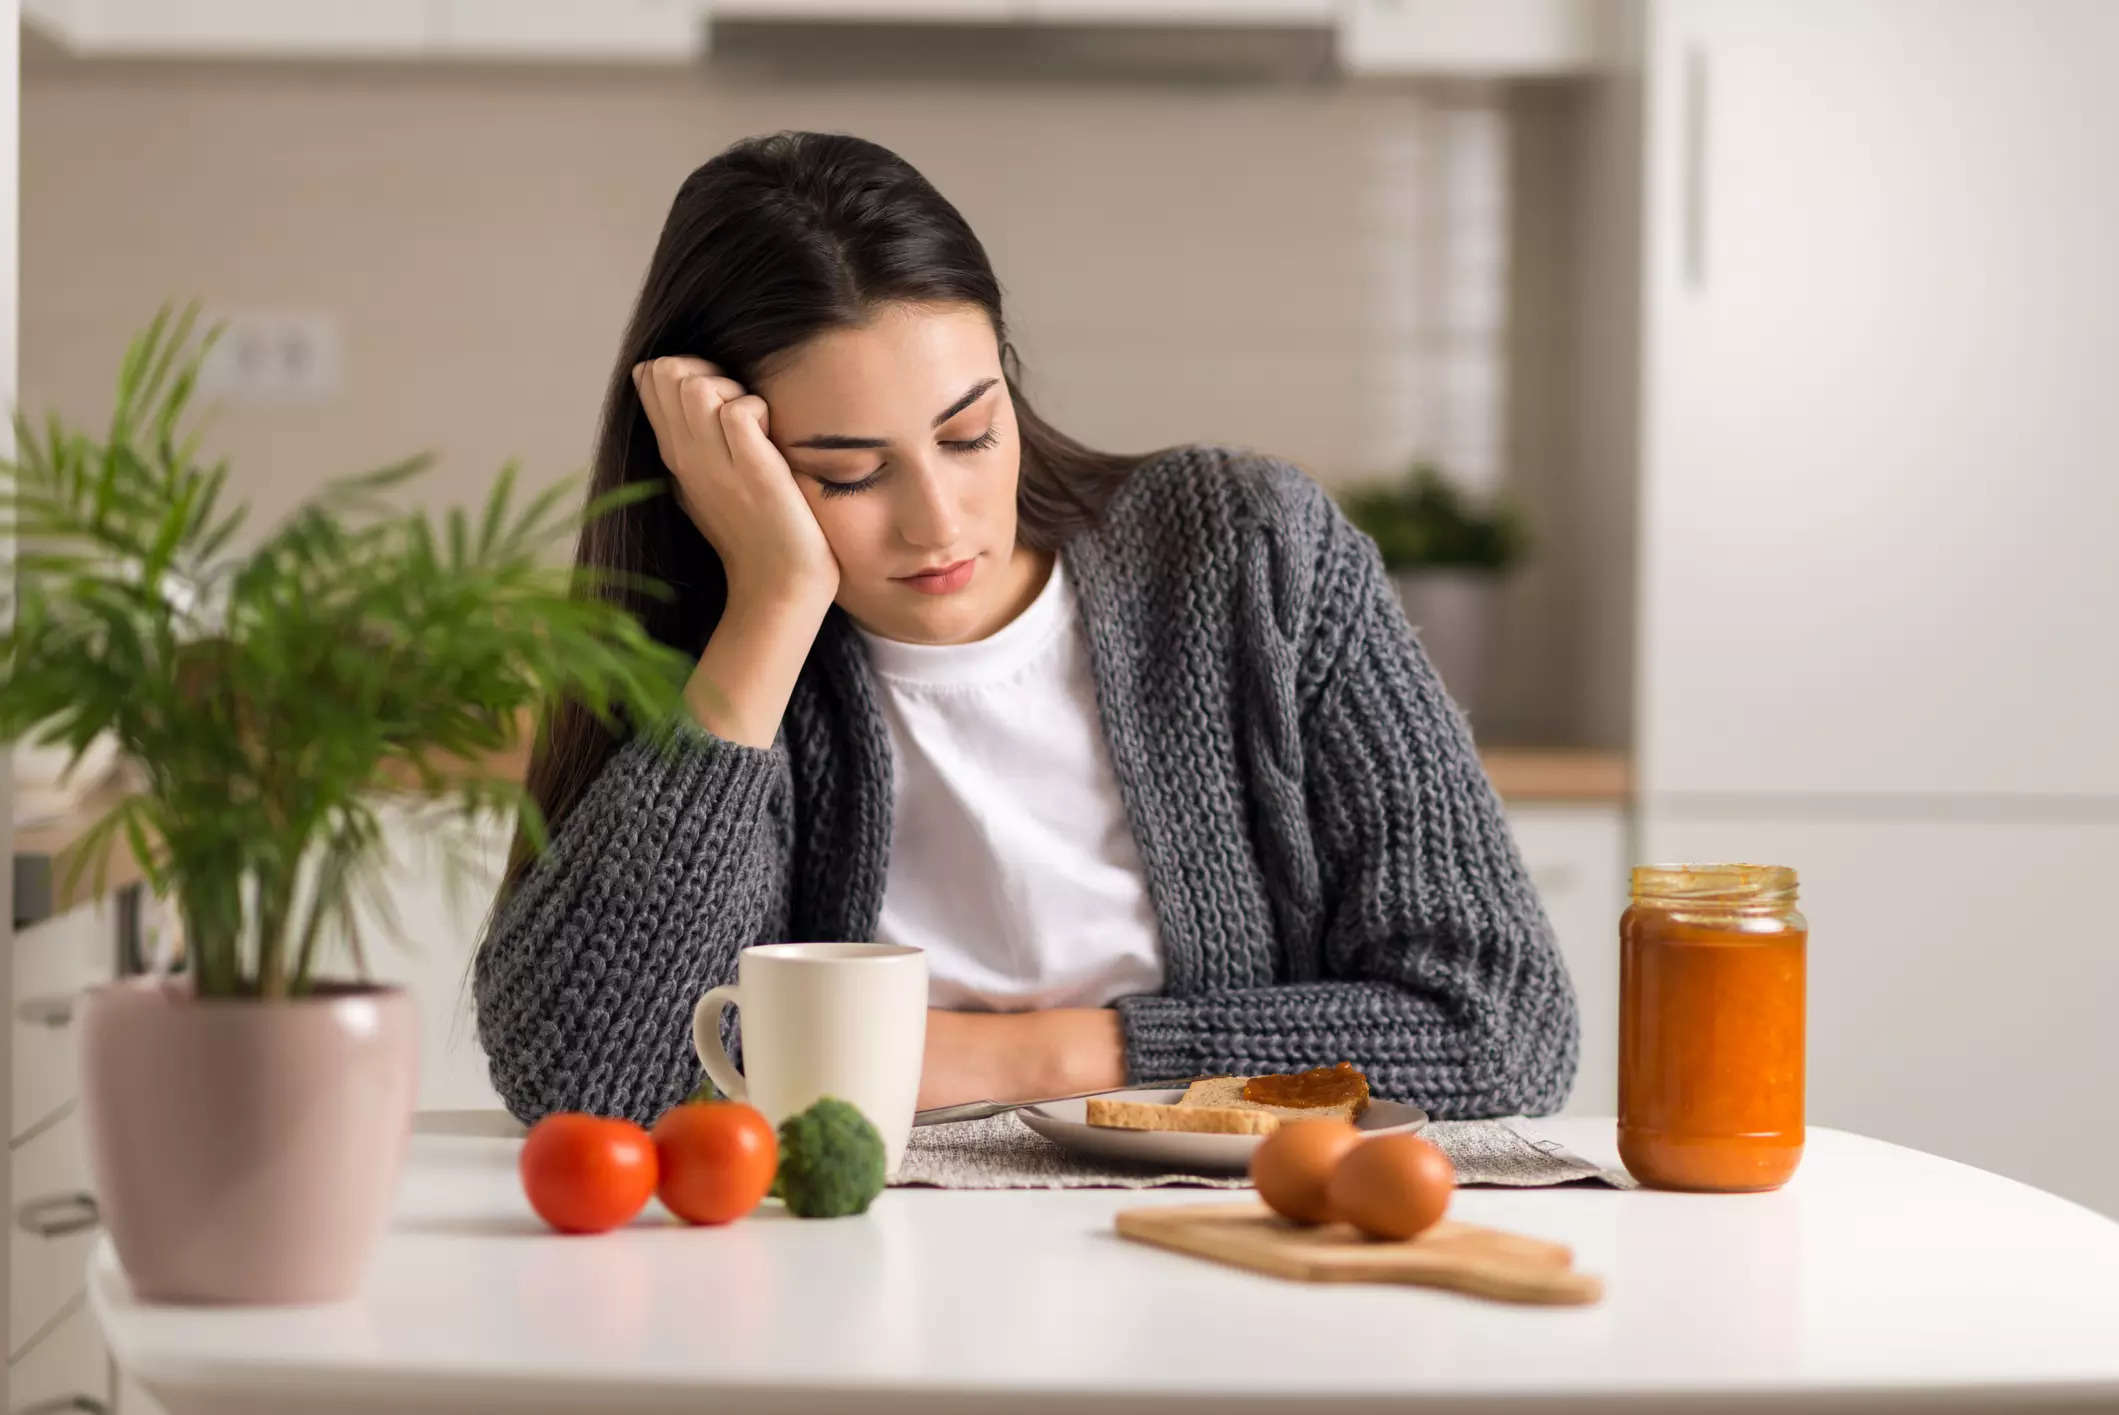 Carbs are the main fuel of the body, the source of energy that people rely on to perform daily functions. Therefore, quitting this food group could cause severe fatigue and energy loss.